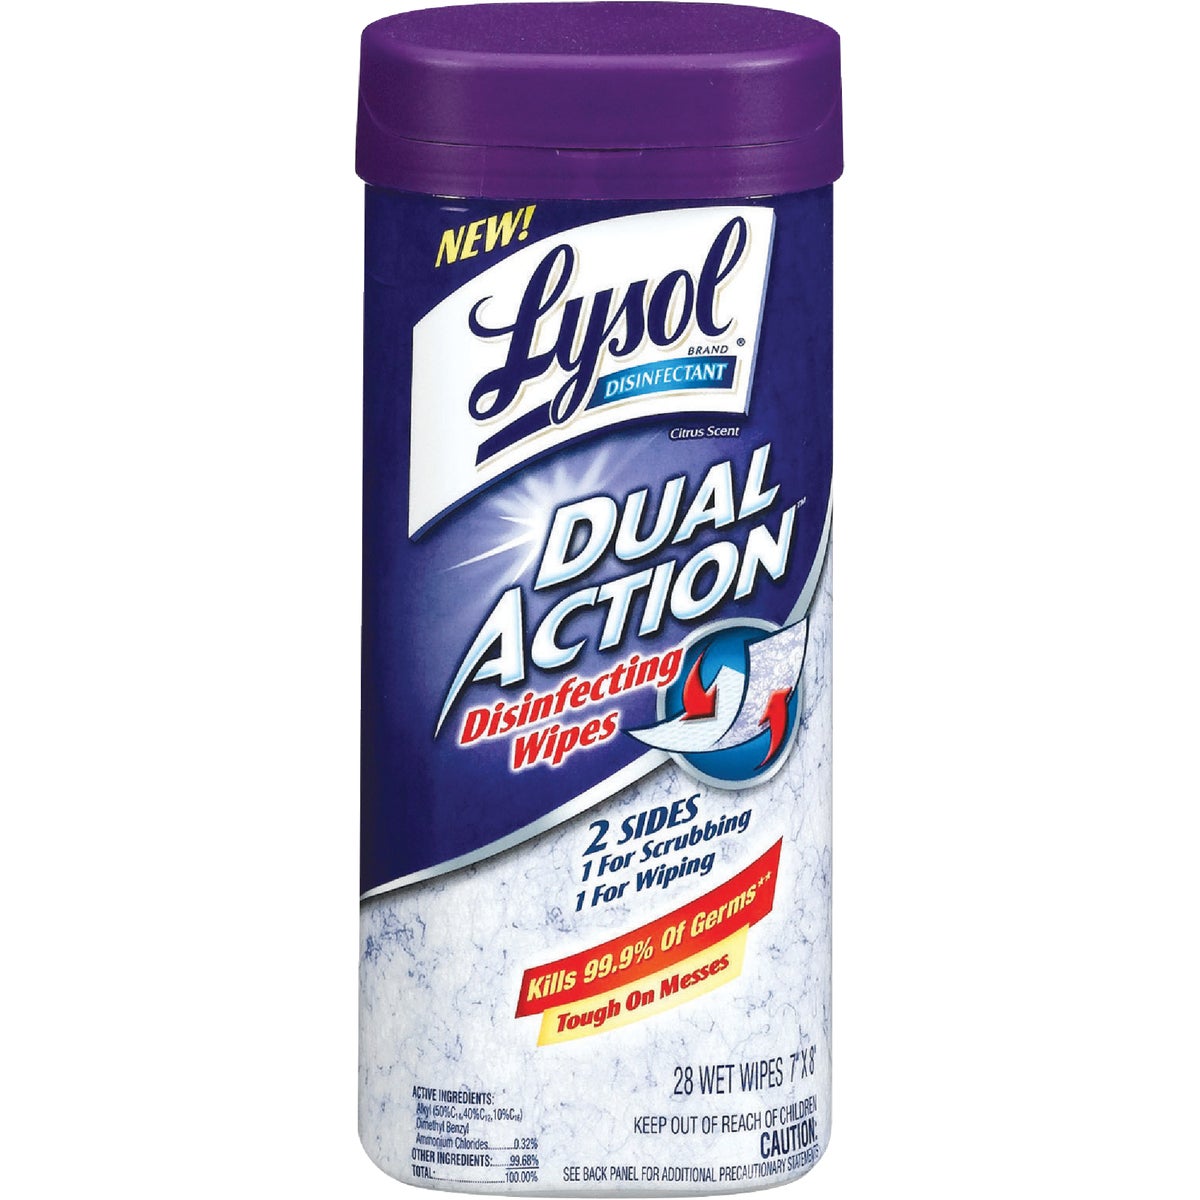 Lysol Dual Action Disinfecting Wipes (28-Count)